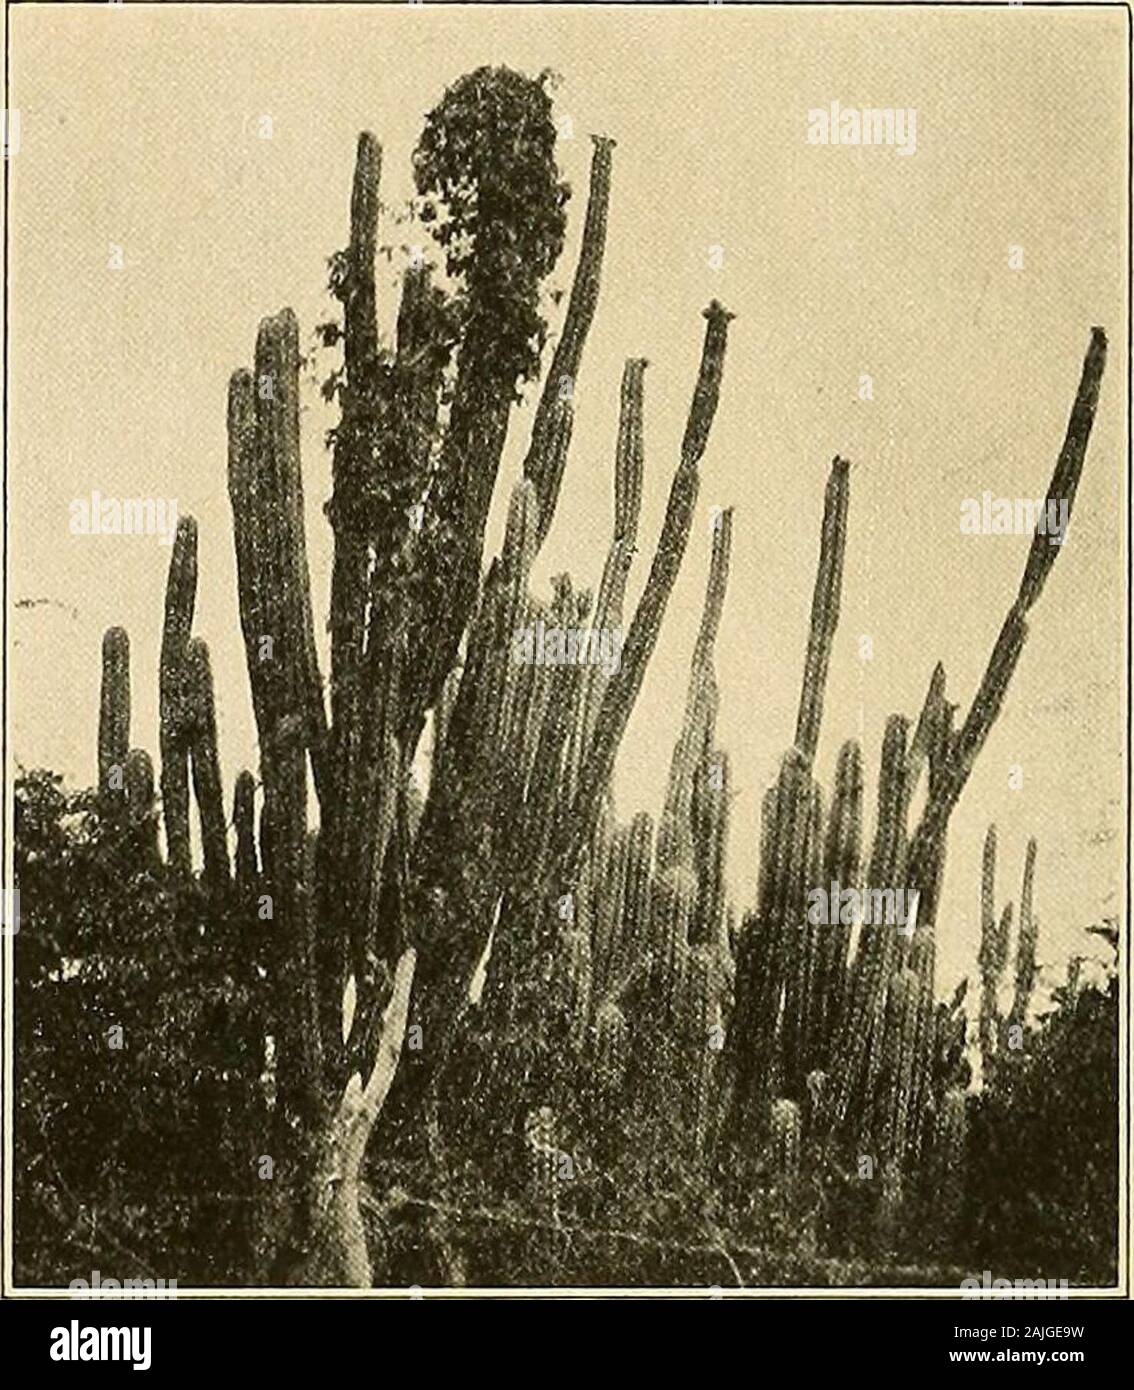 The Cactaceae : descriptions and illustrations of plants of the cactus family . Fig. 59.Fig. 60.- -Flower of Cephalocereus moritzianus.-Fruit of same. Both X0.7.. Fig. 61.—Cephalocereus moritzianus. Figure 61 is from a photograph taken by Mrs. J. N. Rose near Puerto Cabello, Vene-zuela, in 1916; figure 59 shows the flower of this plant; figure 60 a fruit of same. 22. Cephalocereus arrabidae (Lemaire). Pilocereus arrabidae Lemaire, Rev. Hort. 1862: 429. 1862.Cereus warmingii Schumann in Martius, Fl. Bras. 42: 204. 1890.Pilocereus exerens Schumann in Engler and Prantl, Pflanzenfam. 36a;Cephaloce Stock Photo